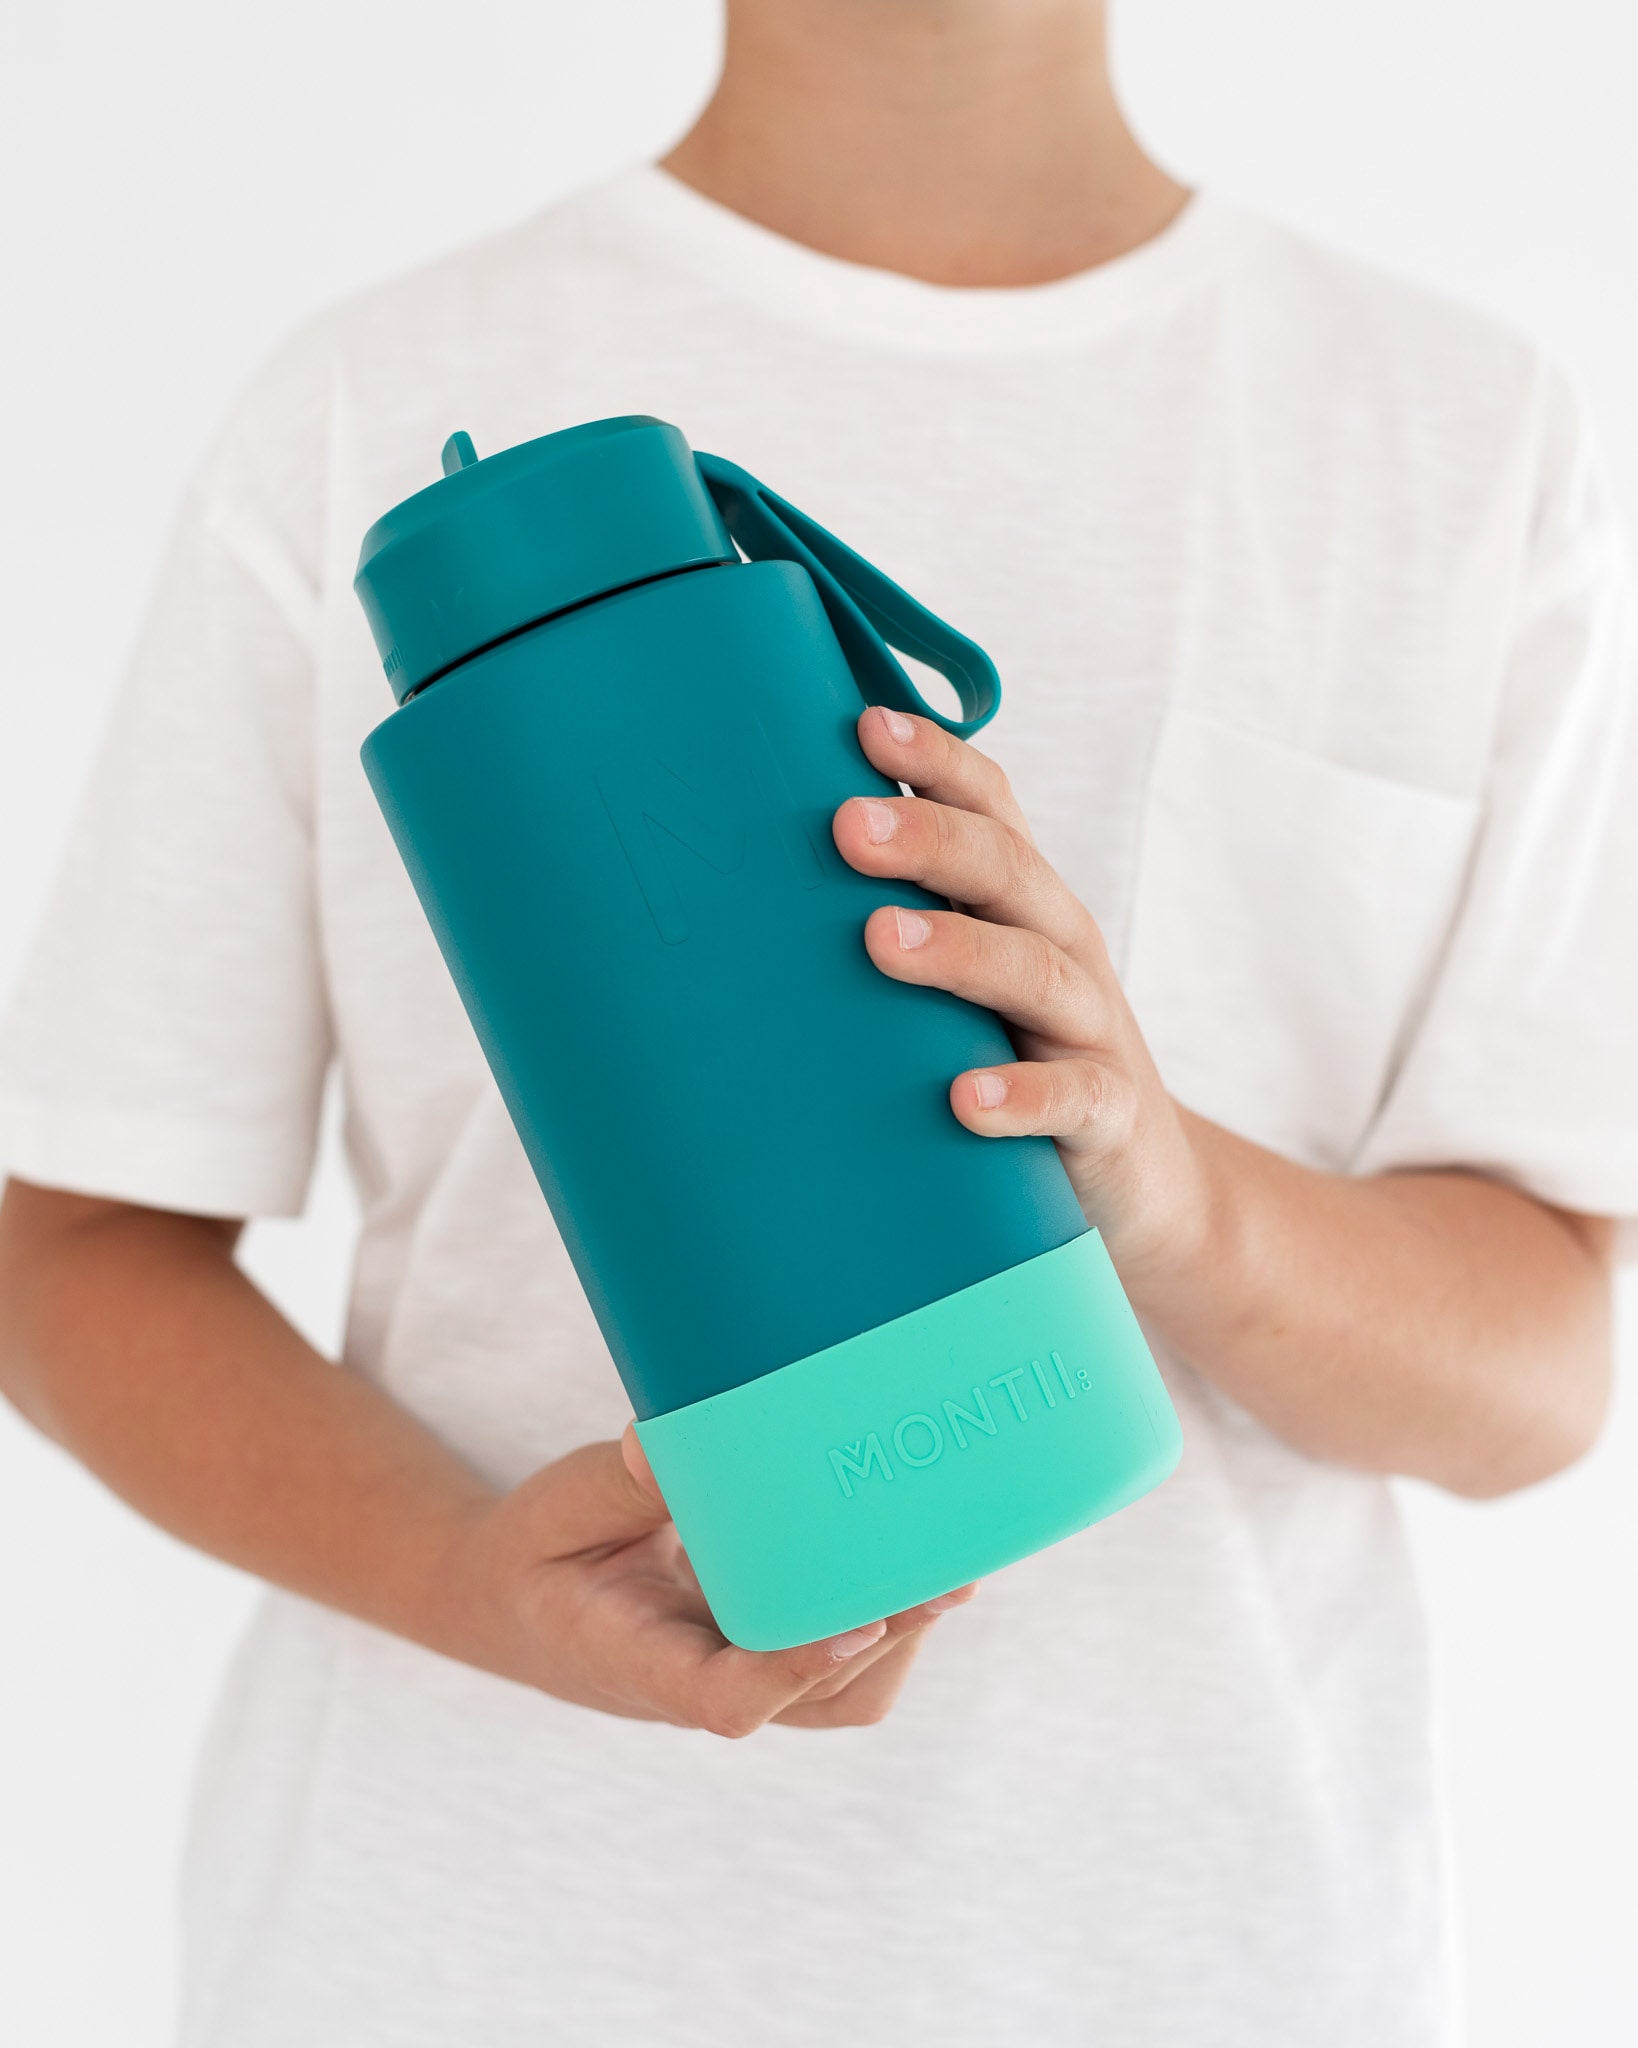 Pine green 1 litre insulated drink bottle base from MontiiCo